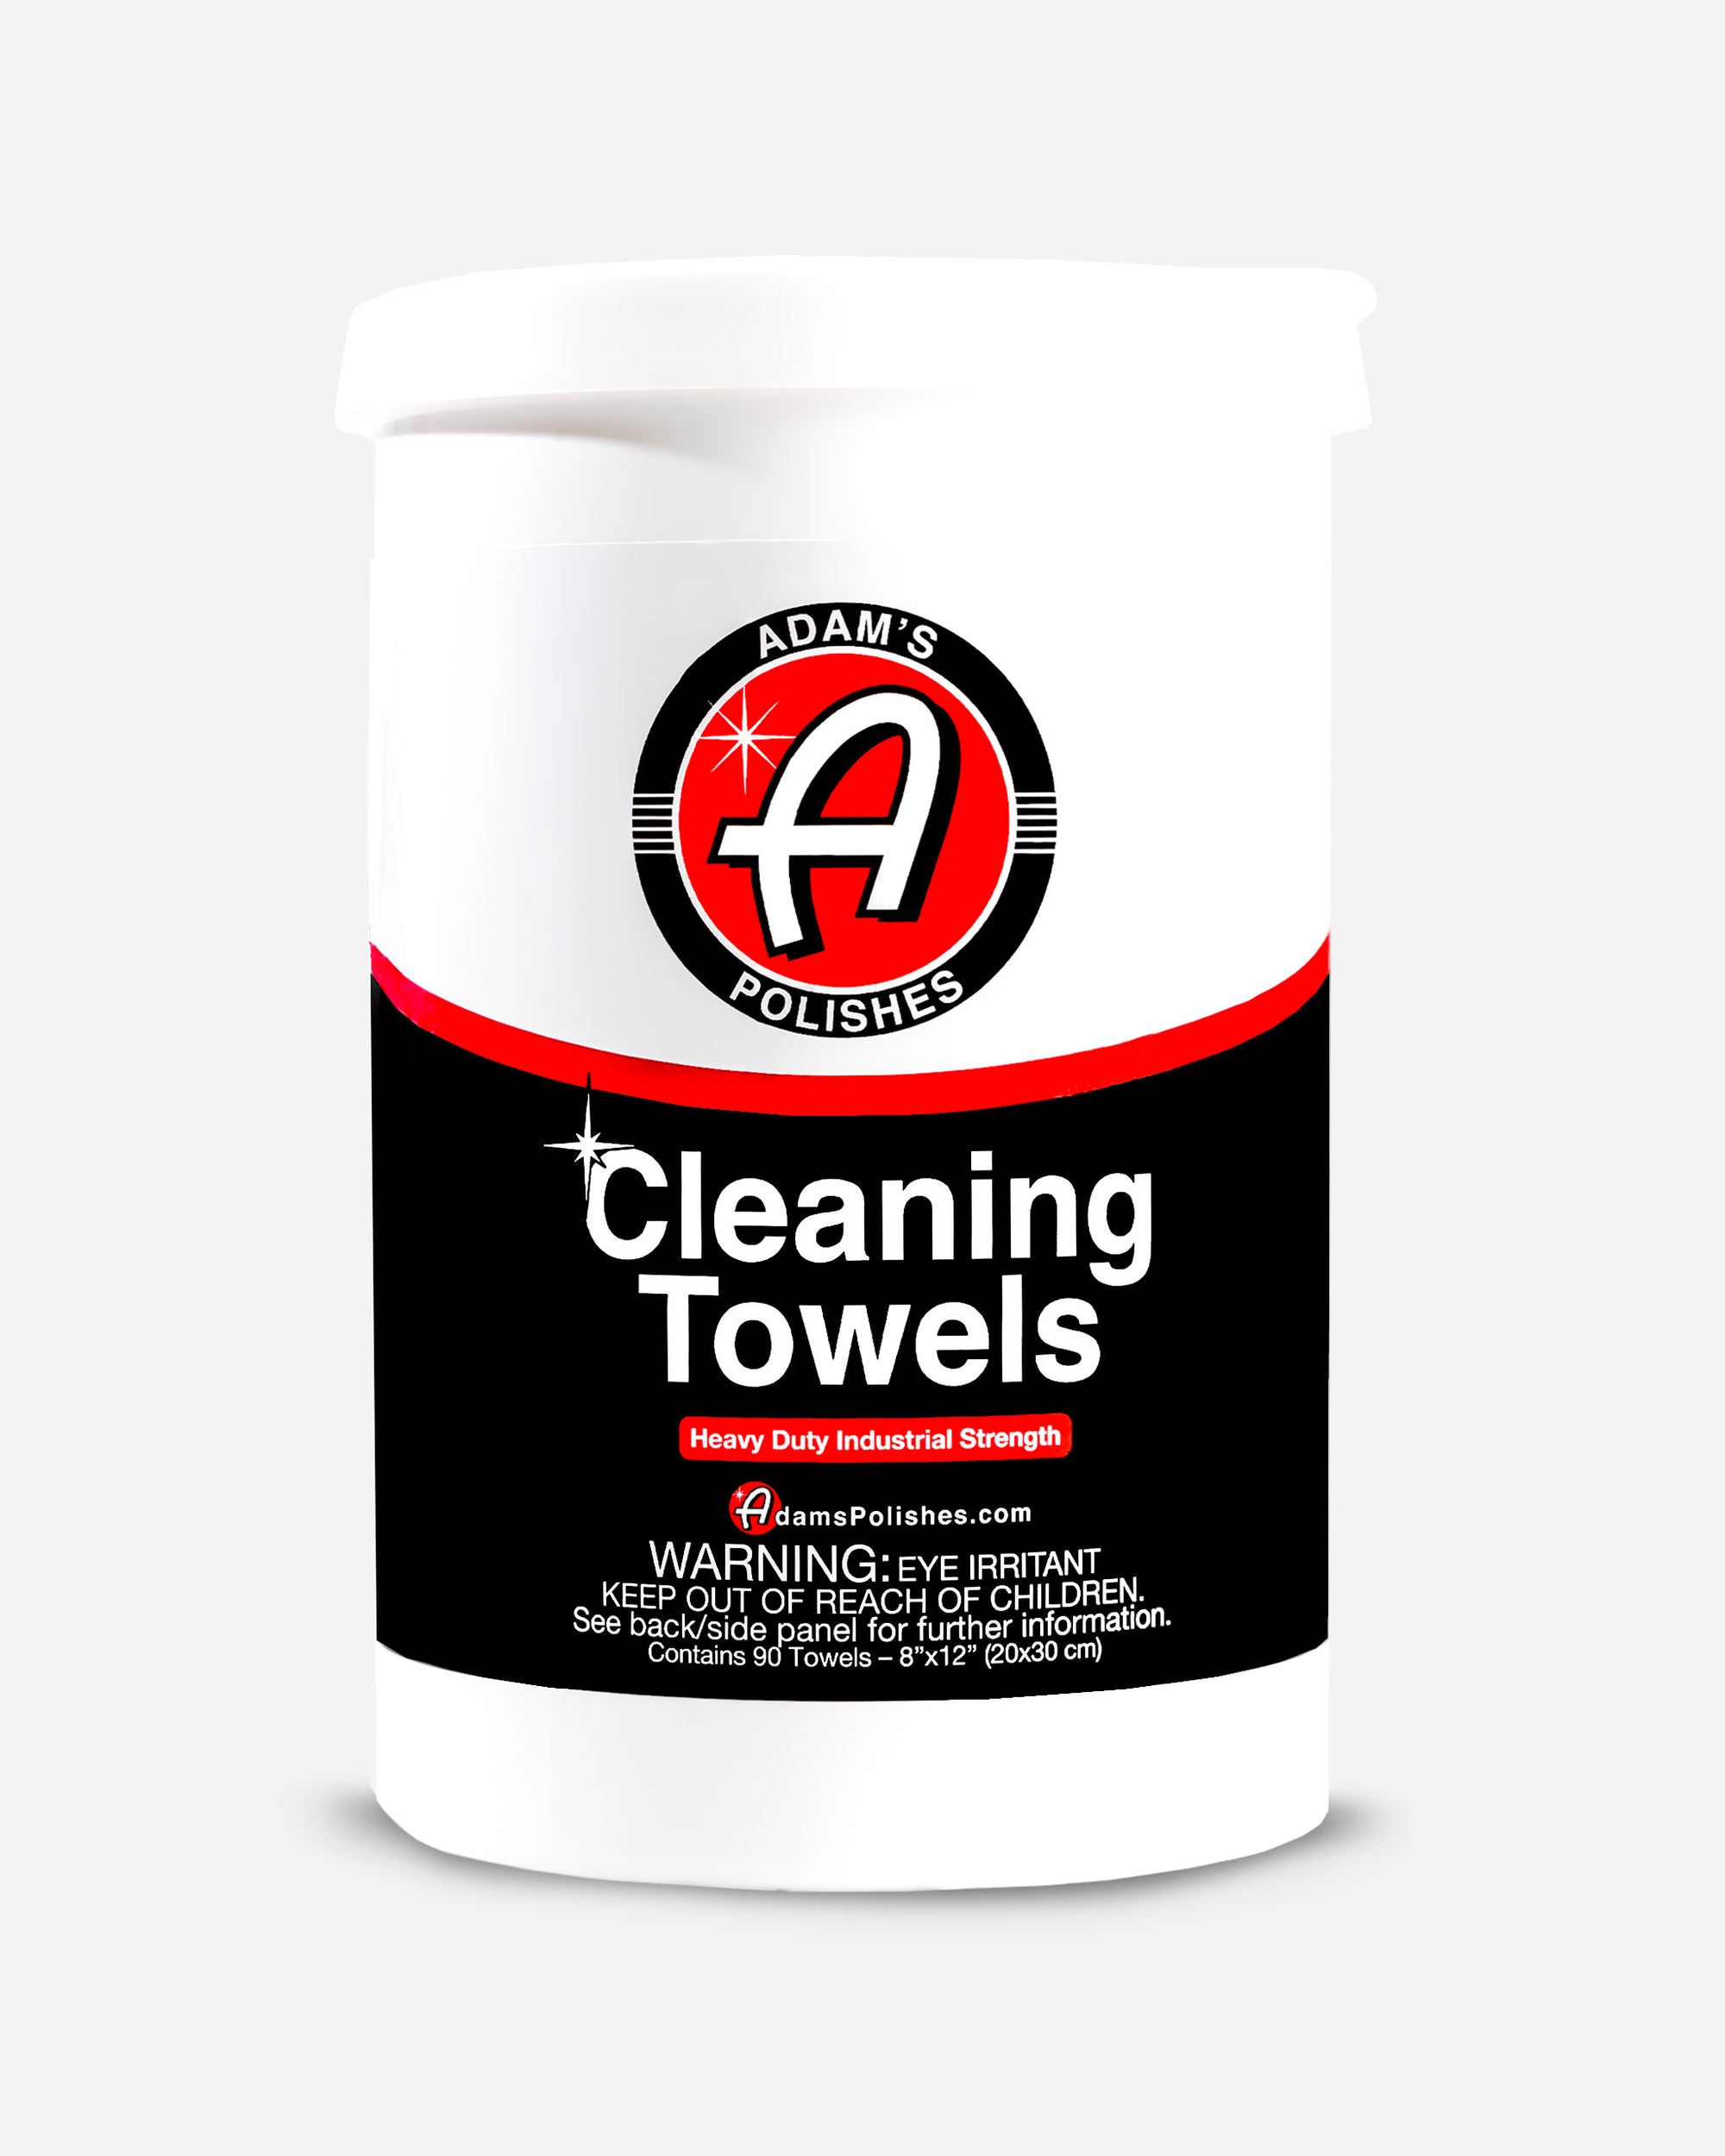 Adam's Cleaning Towels